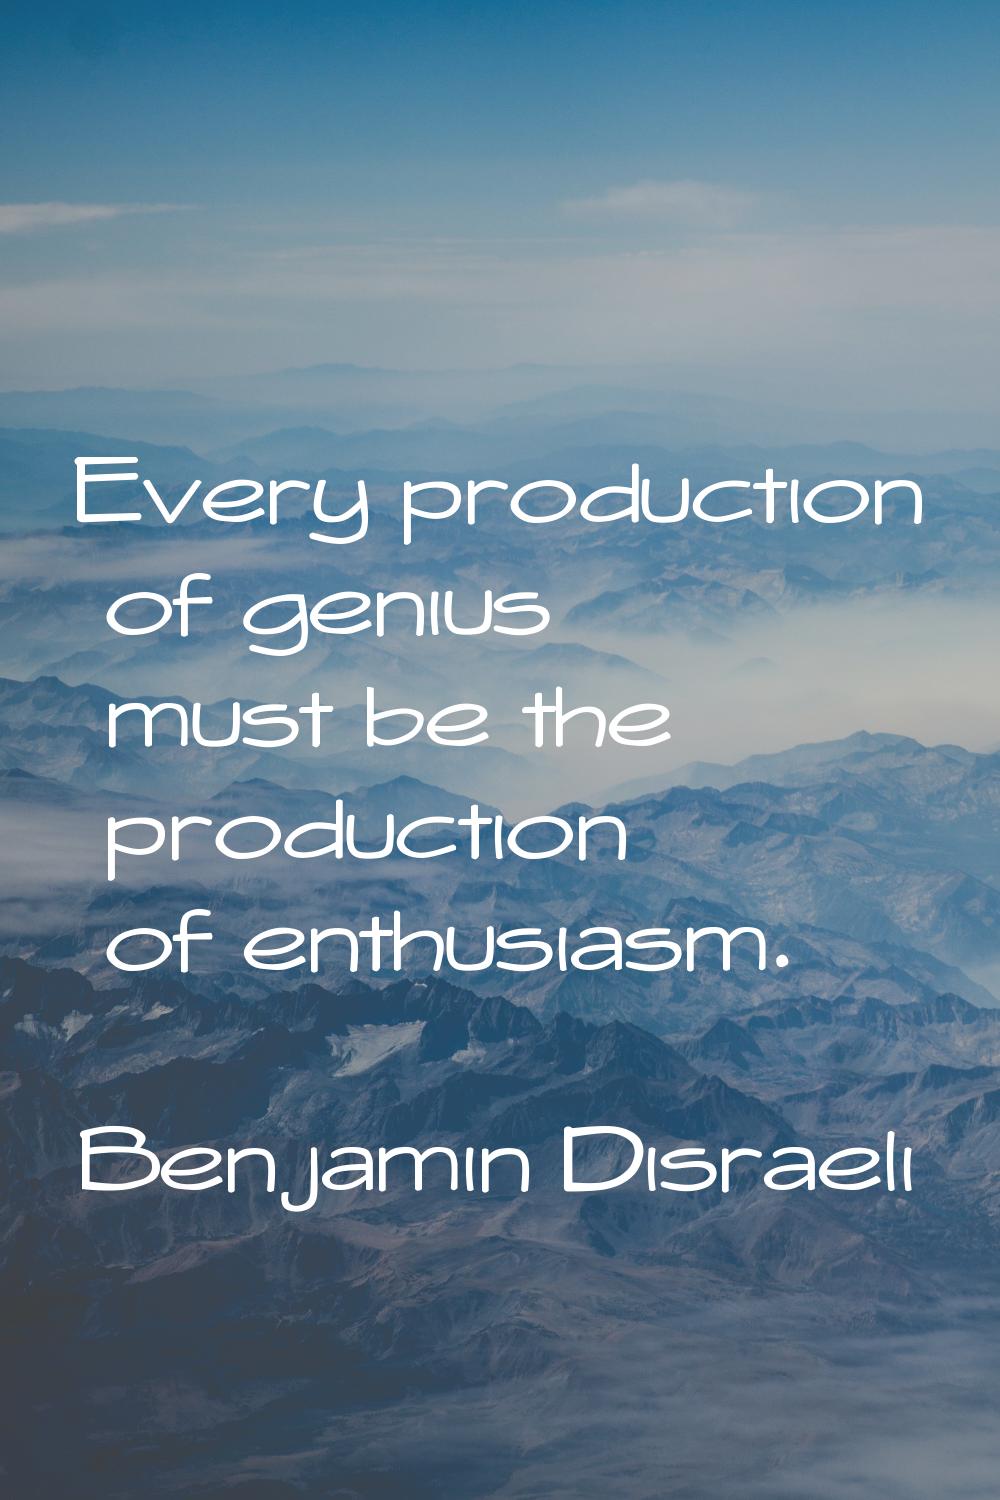 Every production of genius must be the production of enthusiasm.